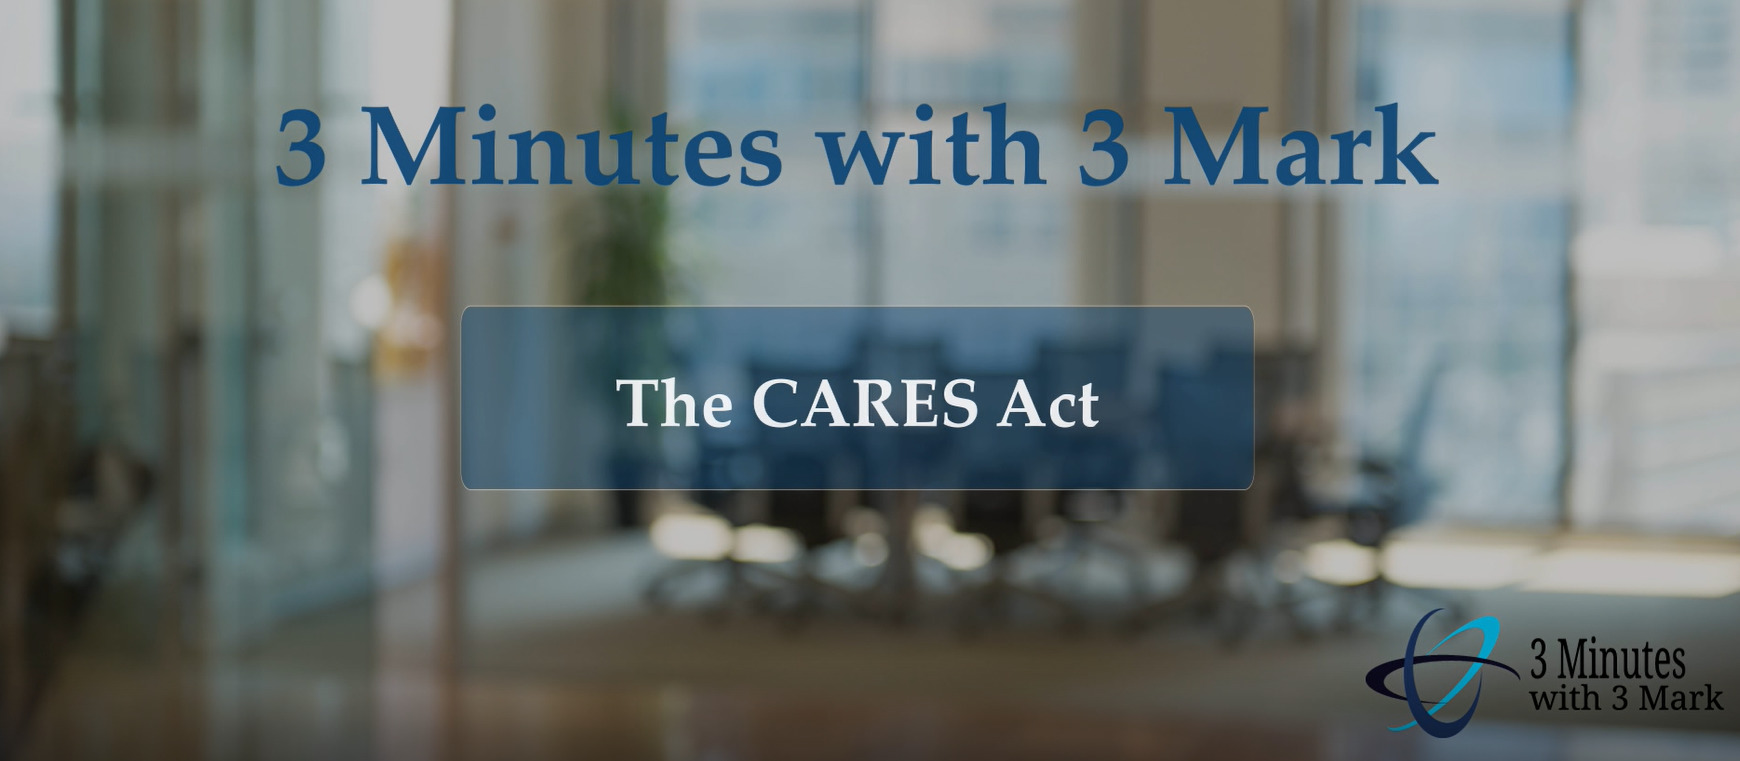 3 Minutes with 3 Mark - The CARES Act & Life Insurance Tax Advantages - Rosanne Kauffman